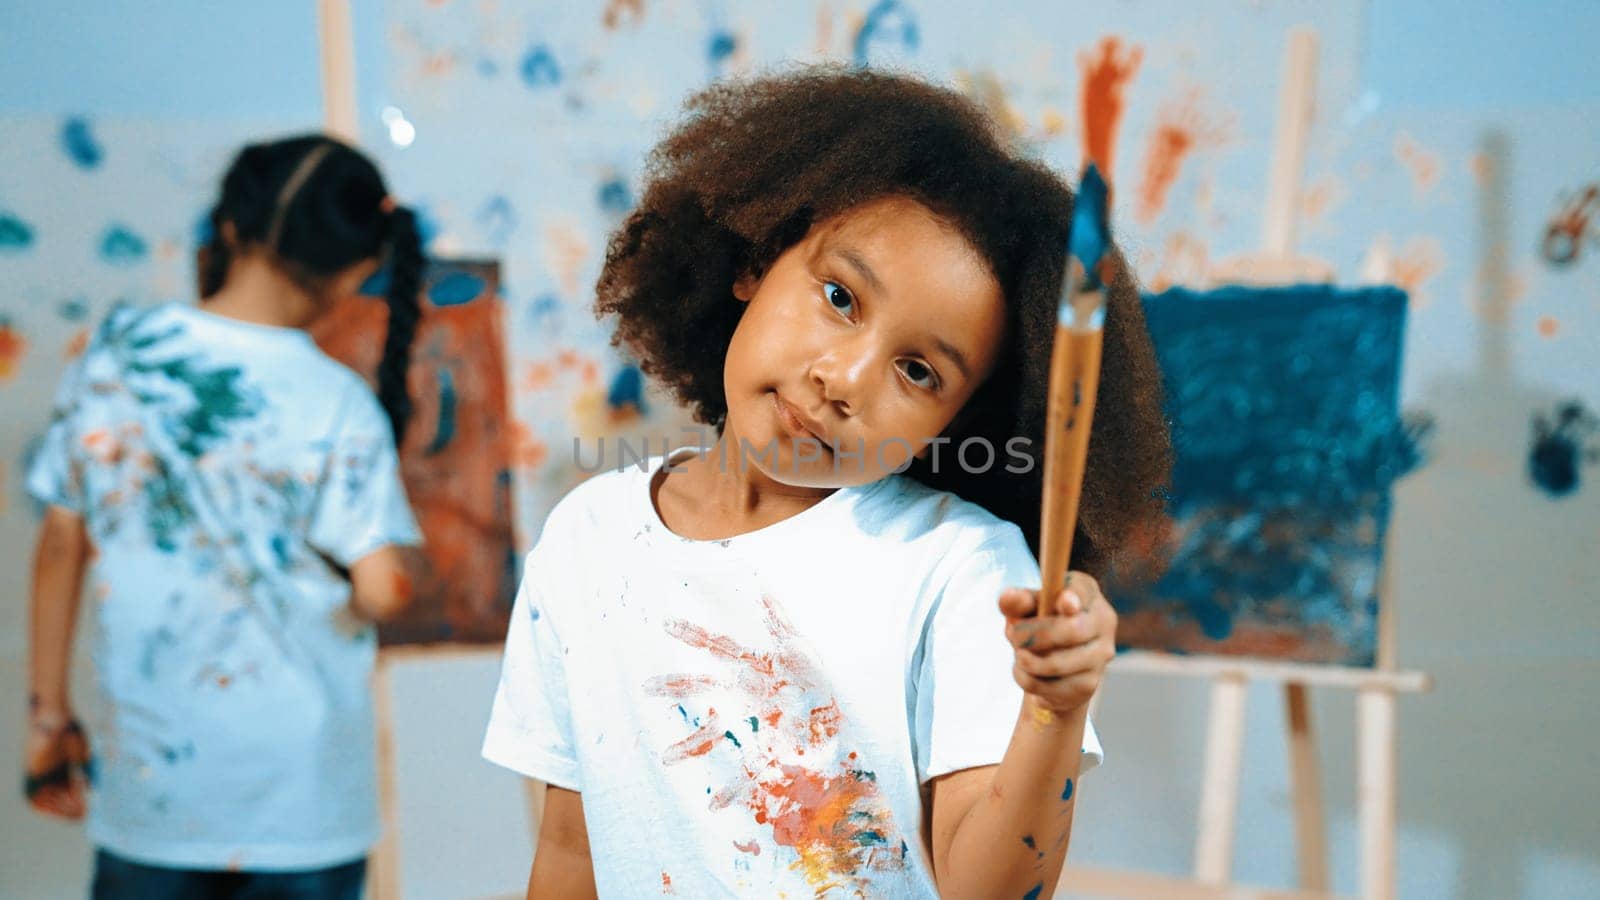 Cute girl holding painted brush while student drawing canvas behind. Erudition. by biancoblue